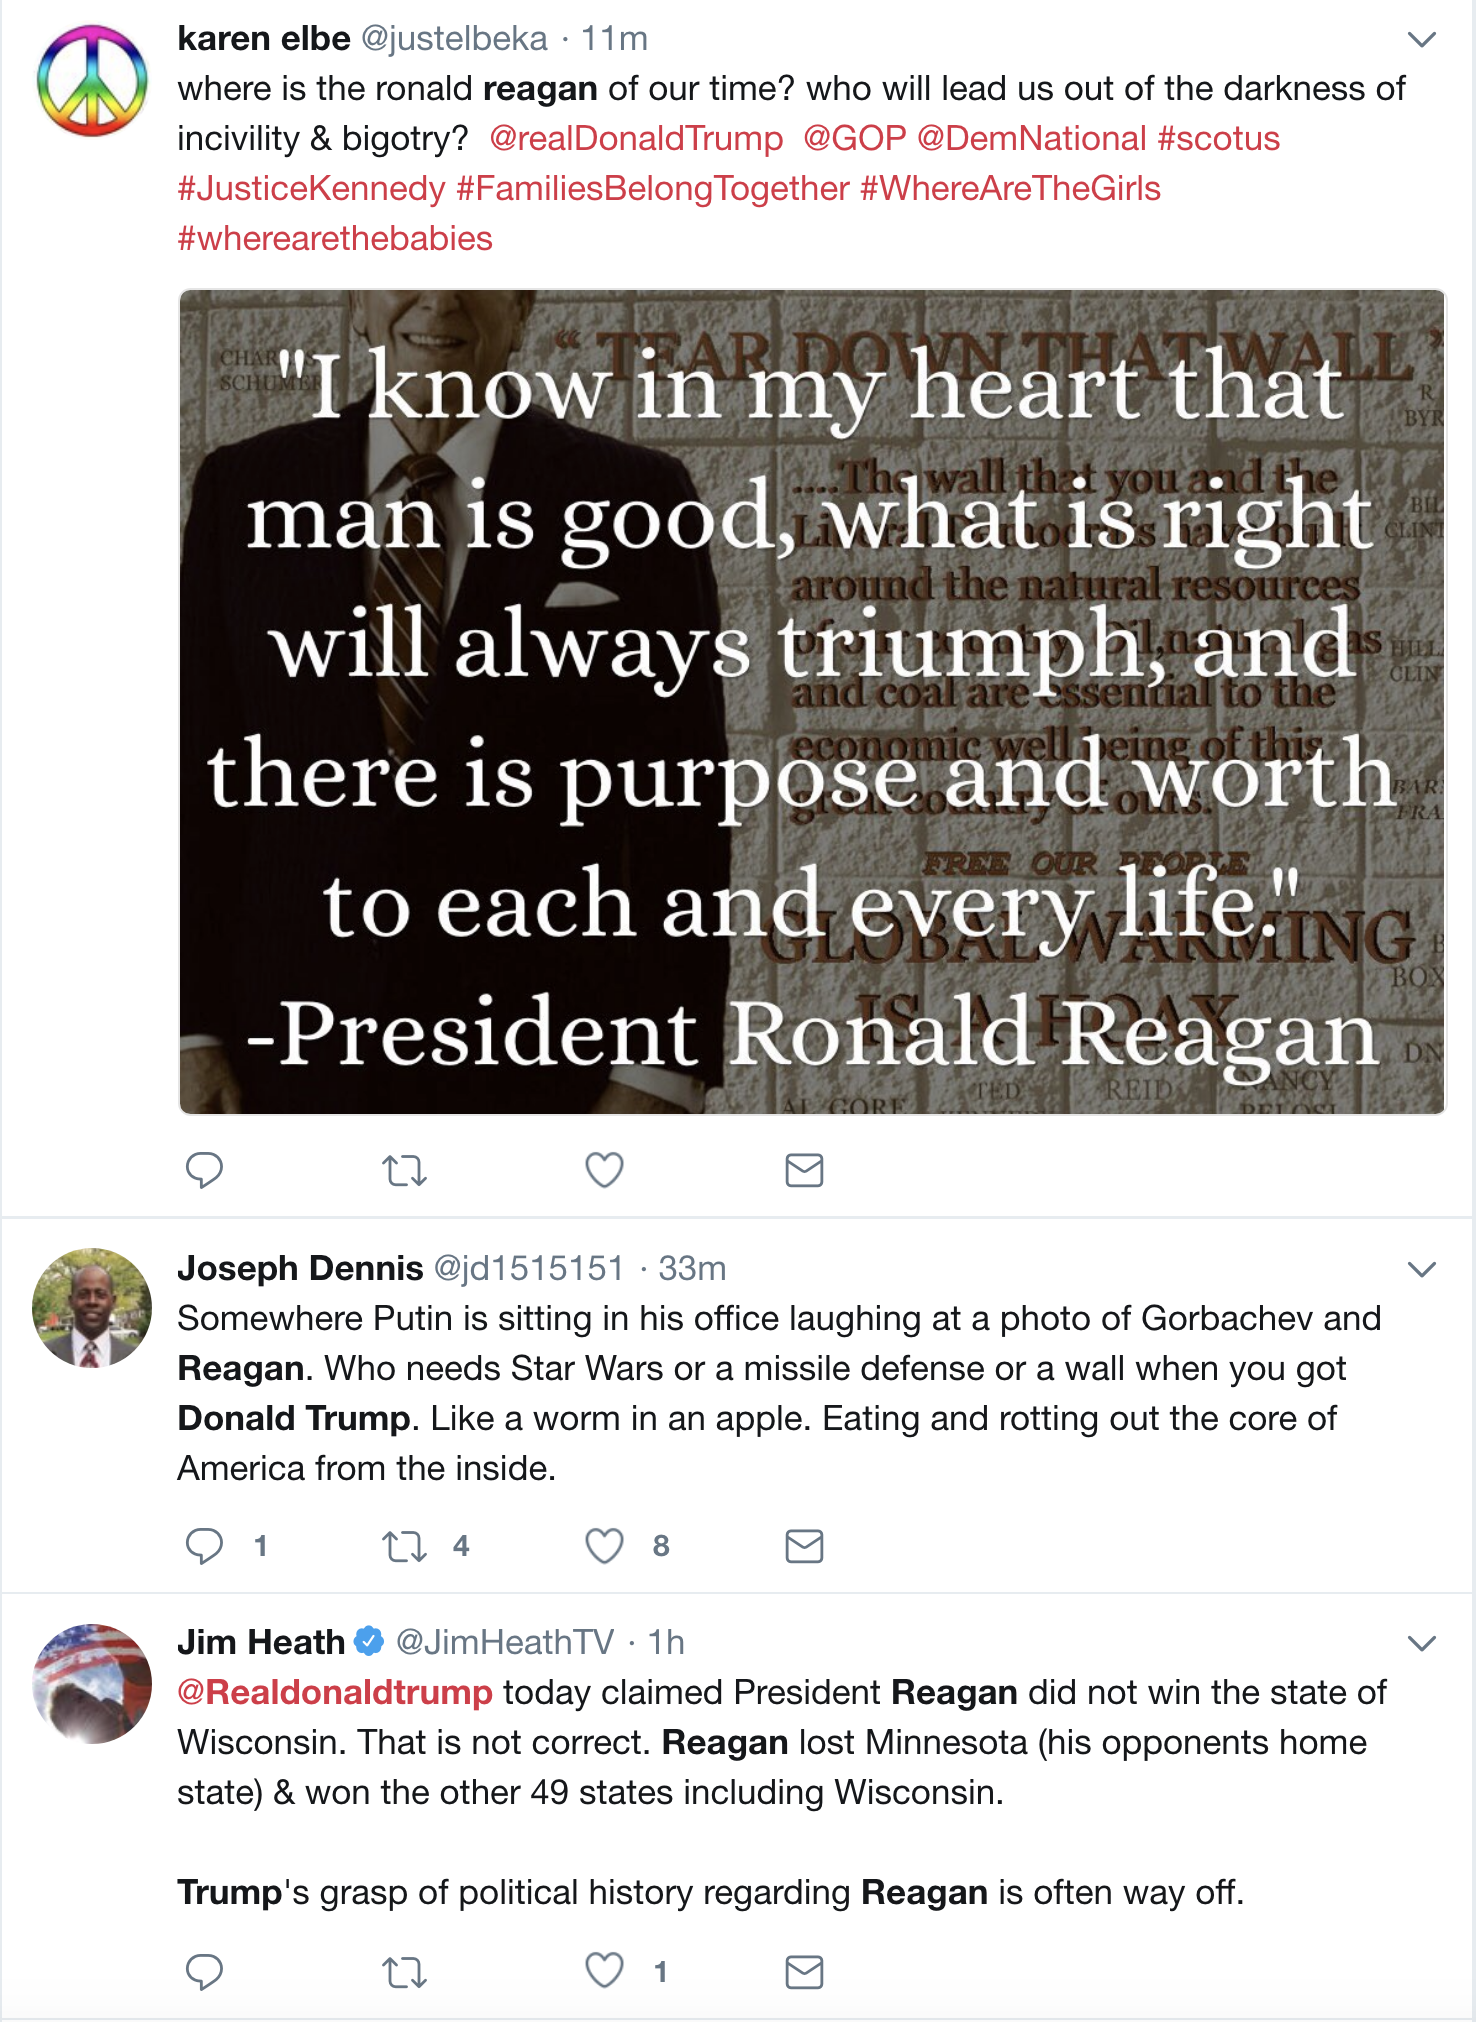 Screen-Shot-2018-06-28-at-3.57.49-PM Trump Makes Up Major Lie About Reagan That Has Republicans Plugging Their Ears Corruption Donald Trump Election 2016 Election 2018 Politics Top Stories 